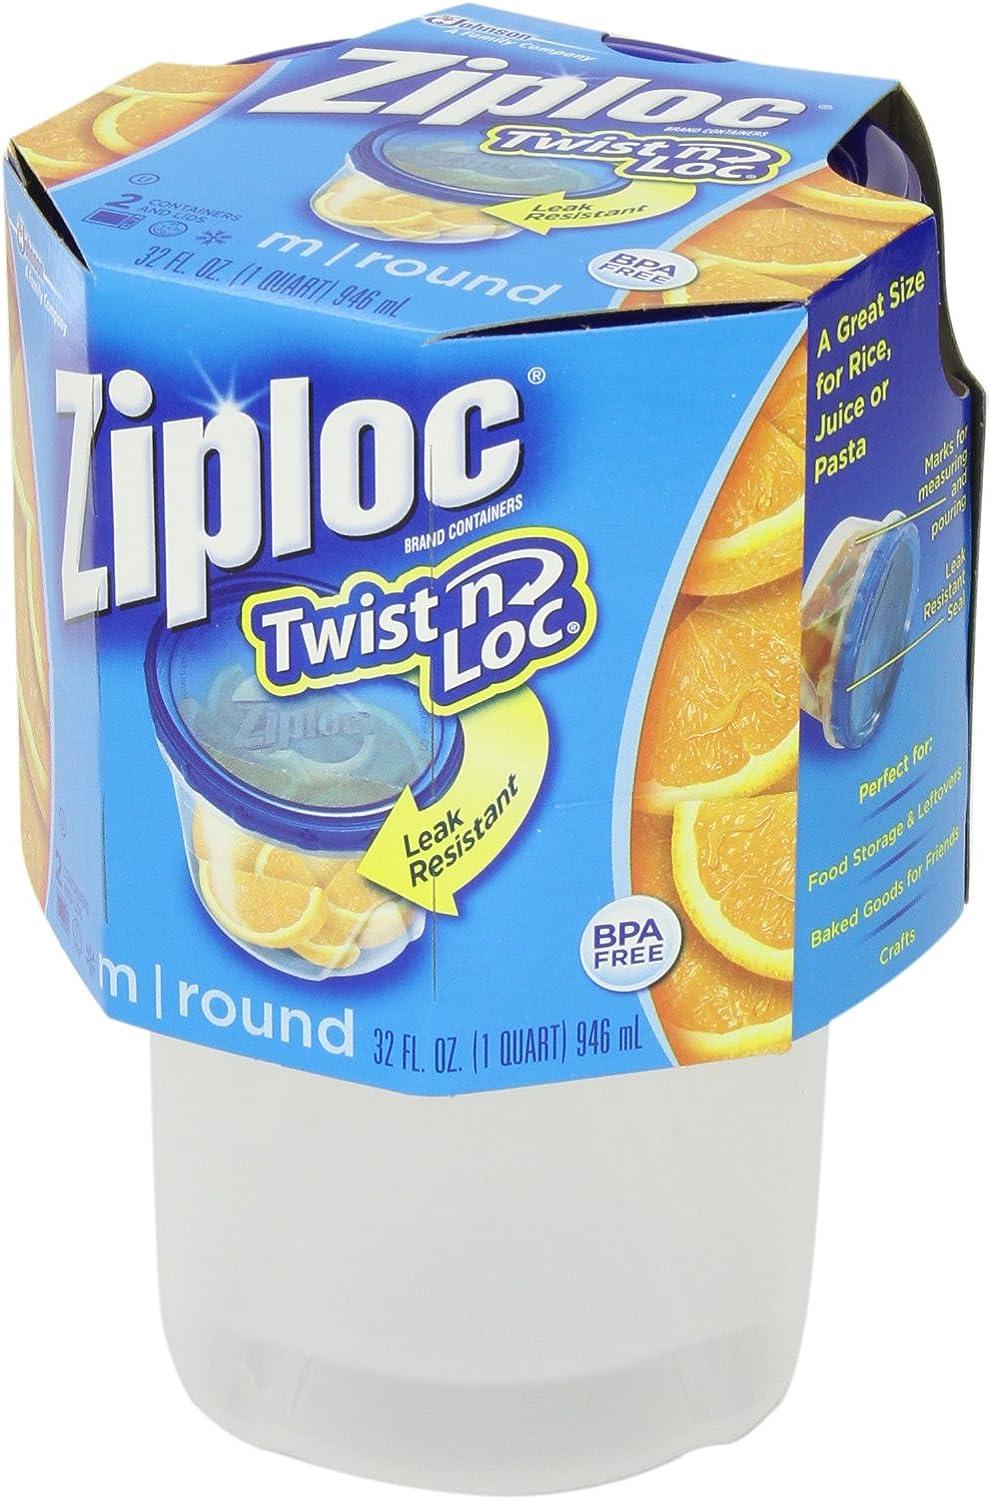 Ziploc Twist 'N Loc Round Food Storage Containers Medium (pack of 2), Delivery Near You